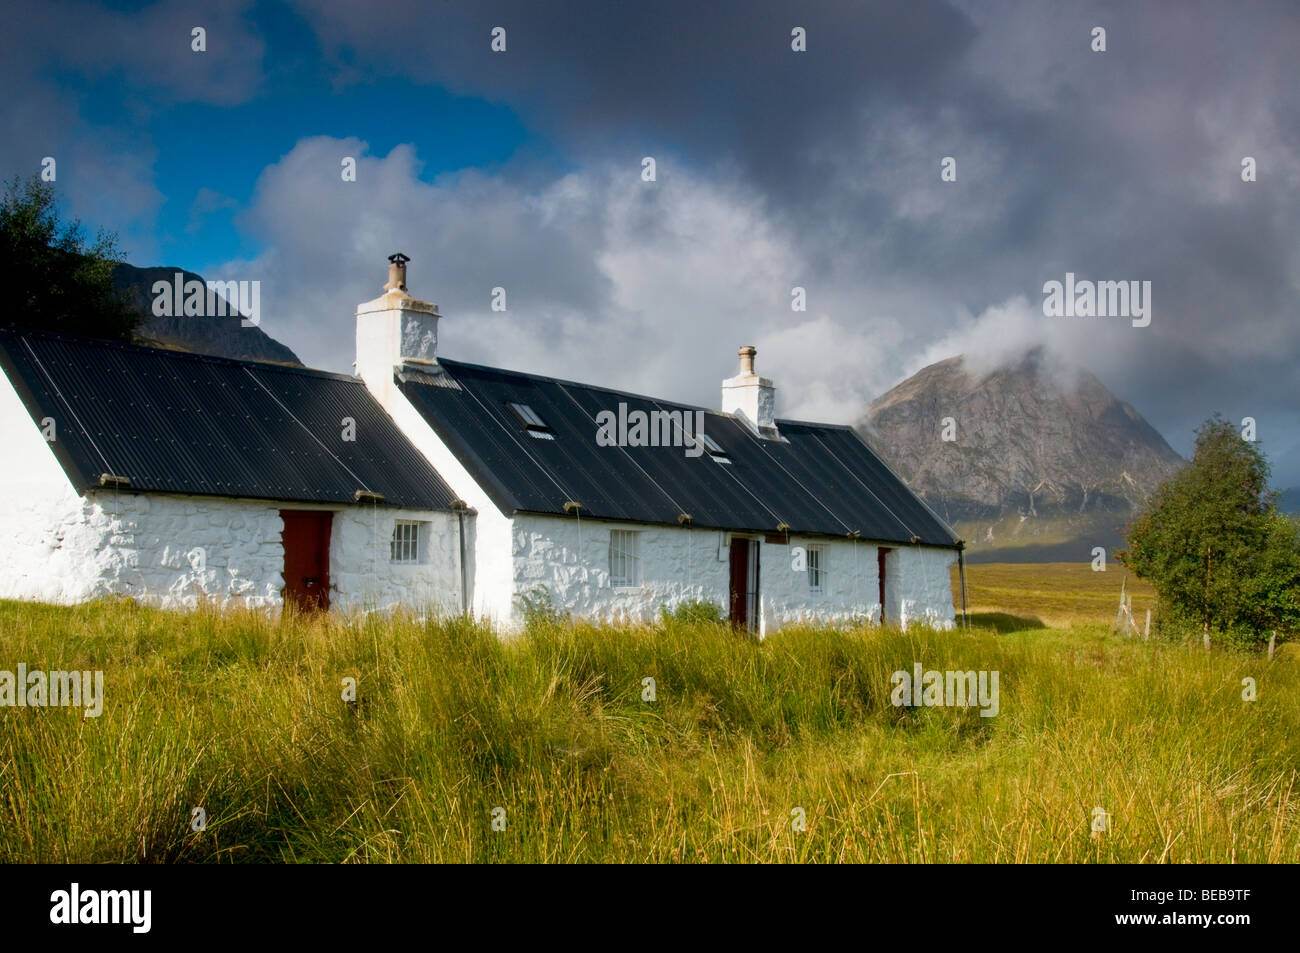 Blackrock Cottage at the foot of the White Corries in Glencoe, Inverness-shire.   SCO 5345 Stock Photo